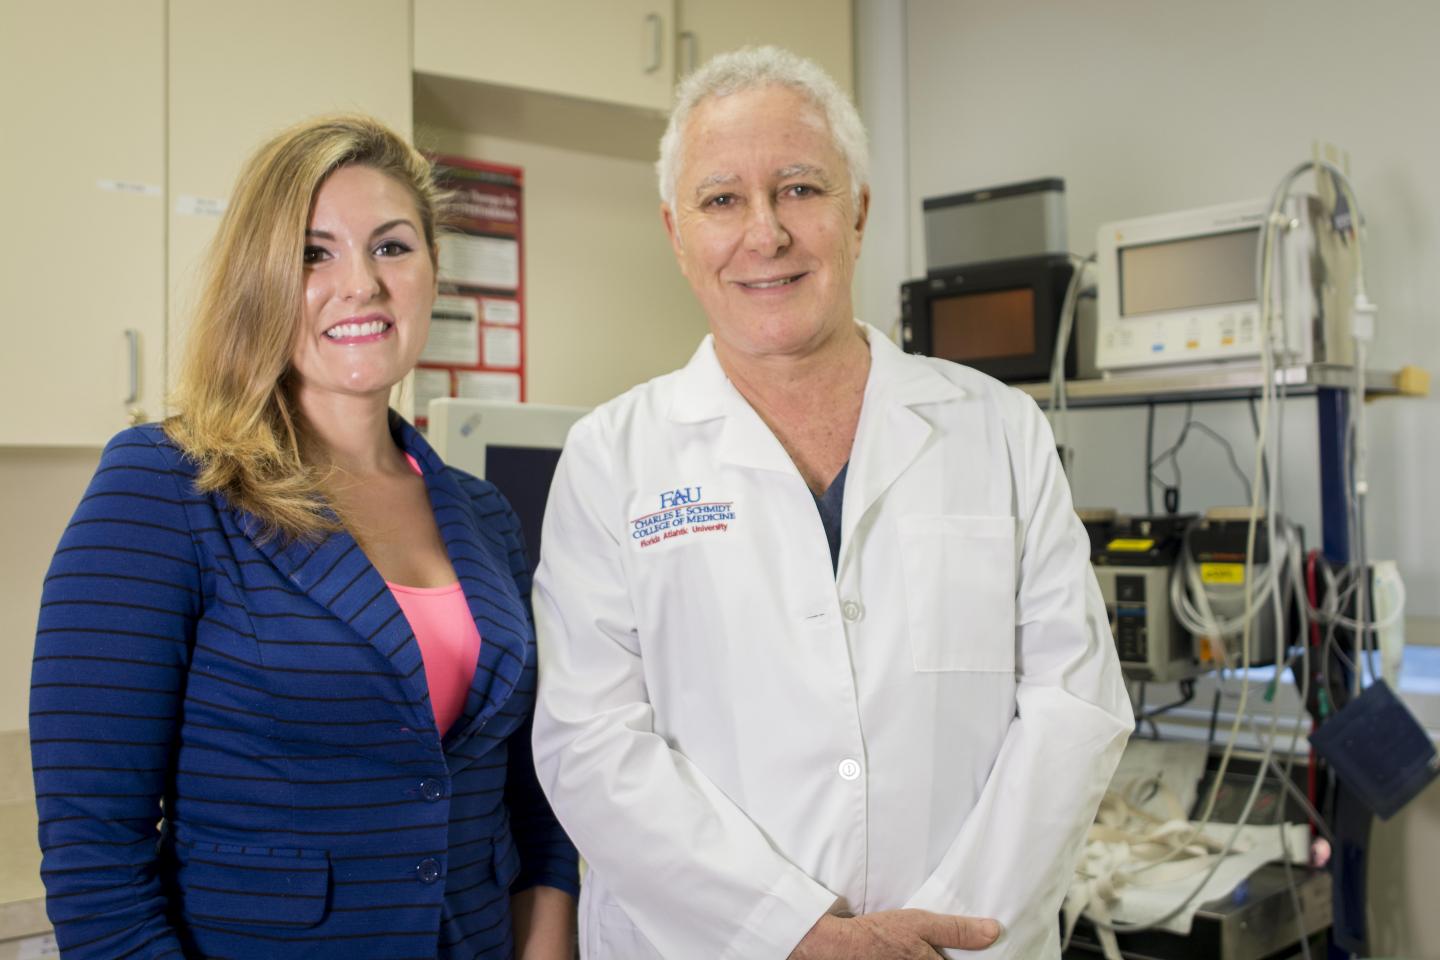 FAU Student and Surgeon Collaborate on New, Alternative Procedure to Radical Mastectomy